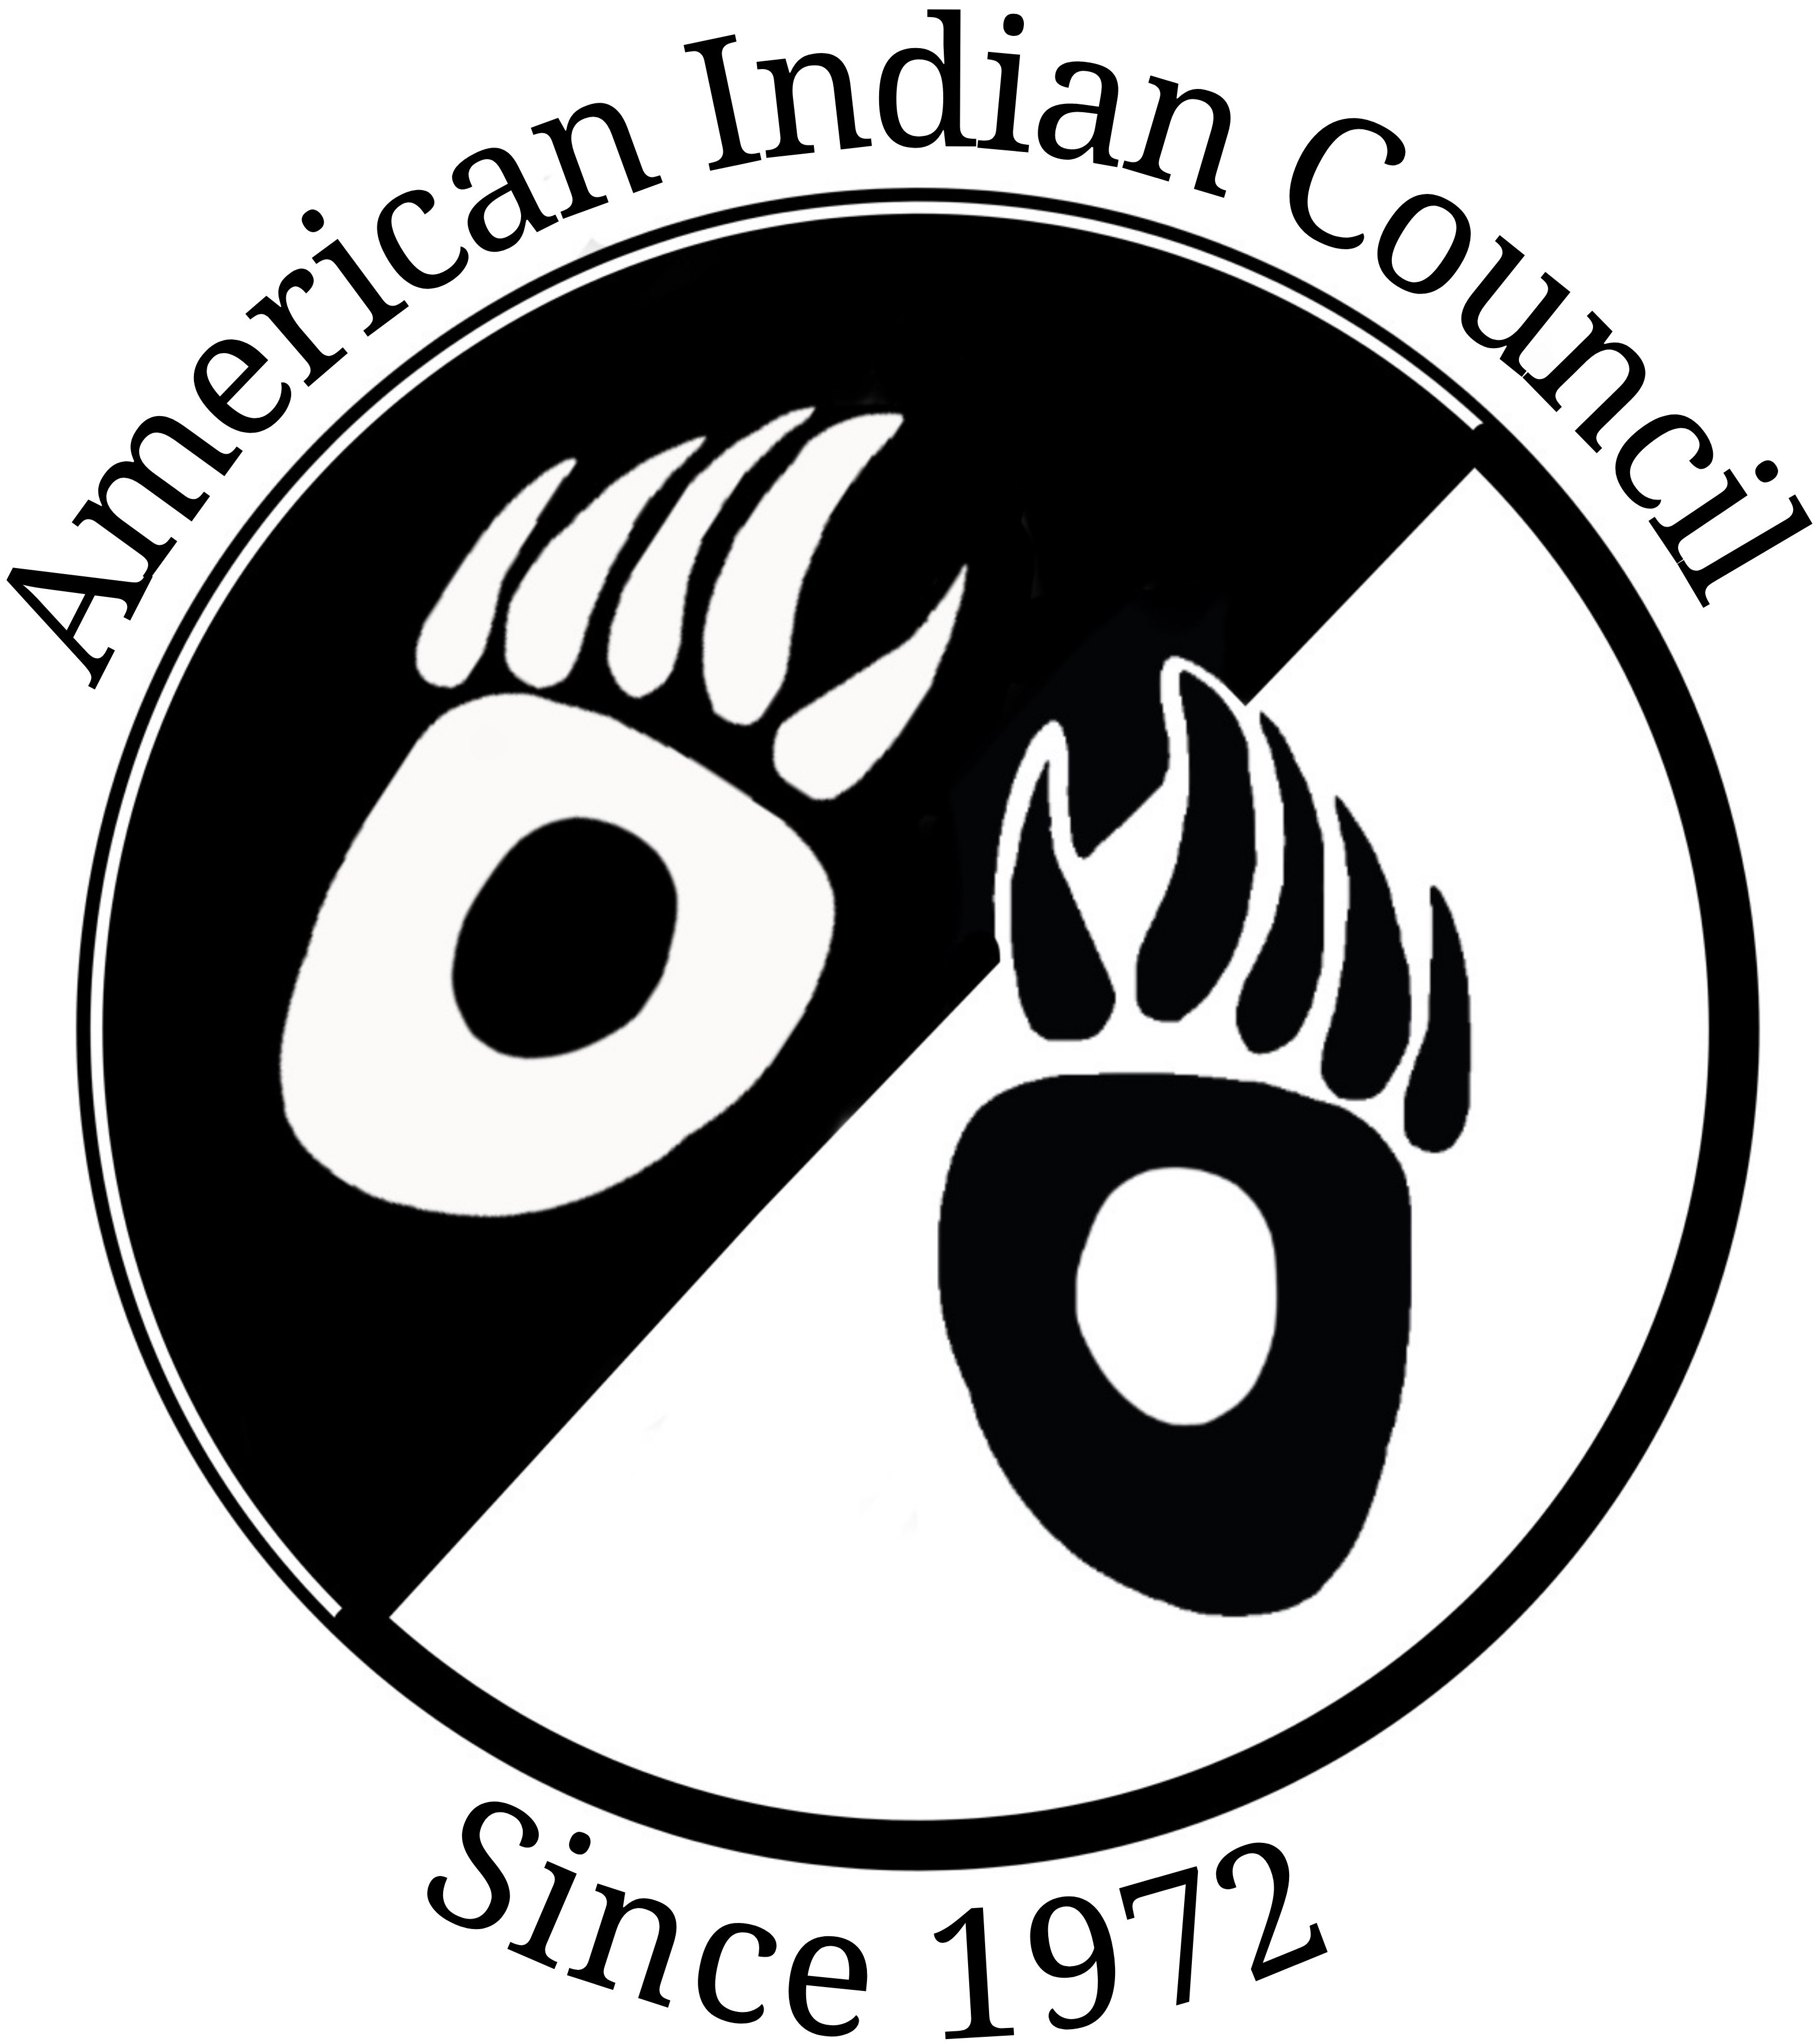 American Indian Council